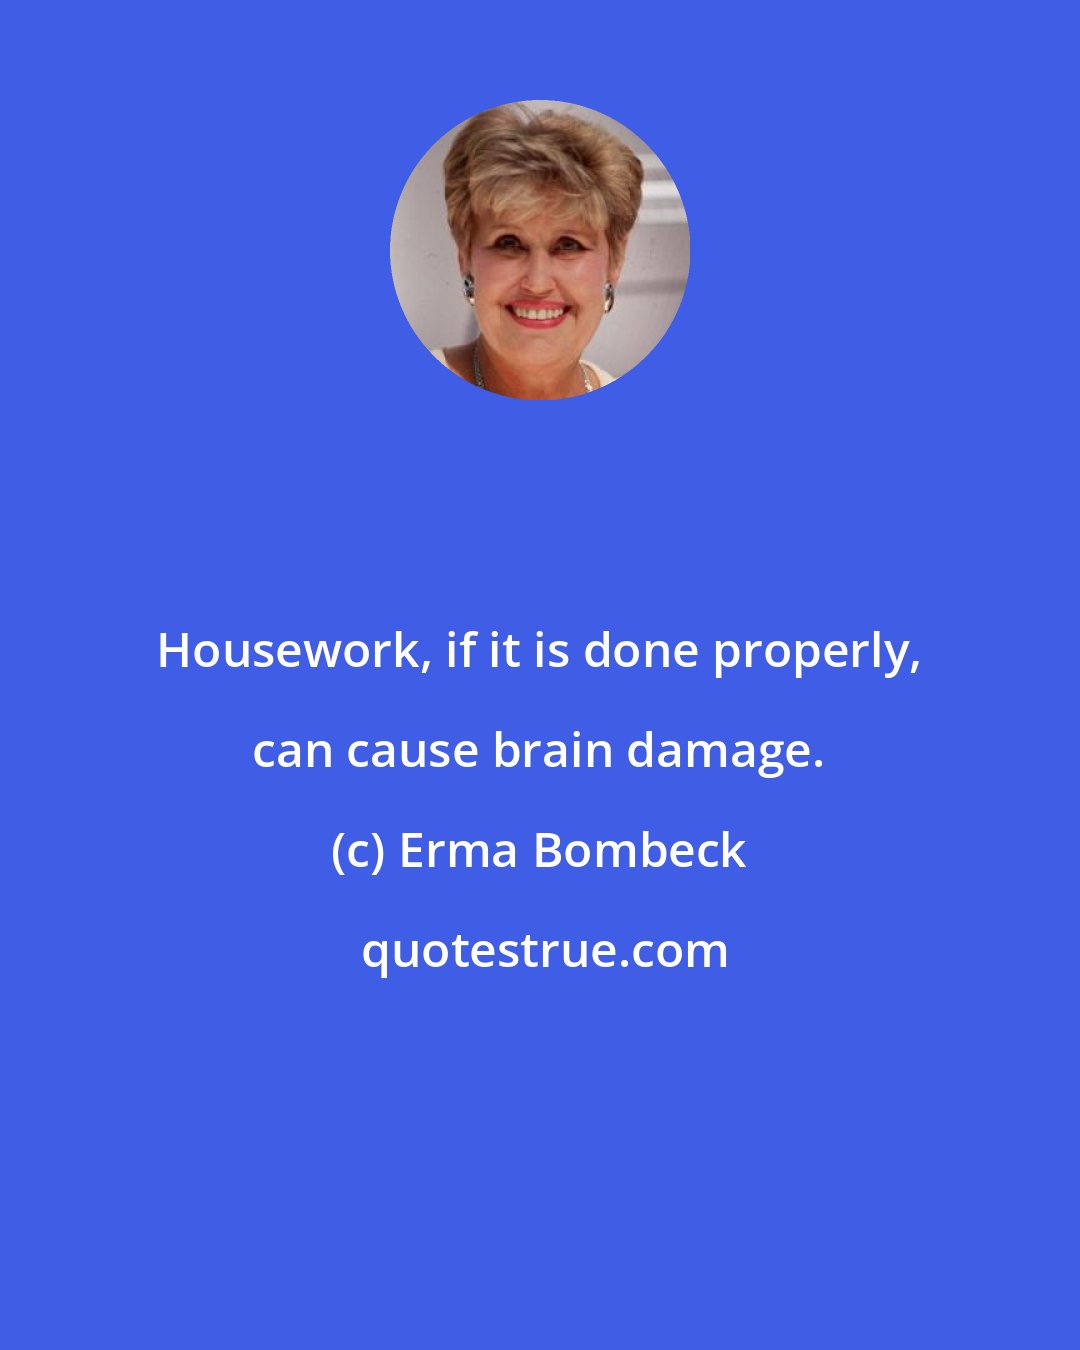 Erma Bombeck: Housework, if it is done properly, can cause brain damage.